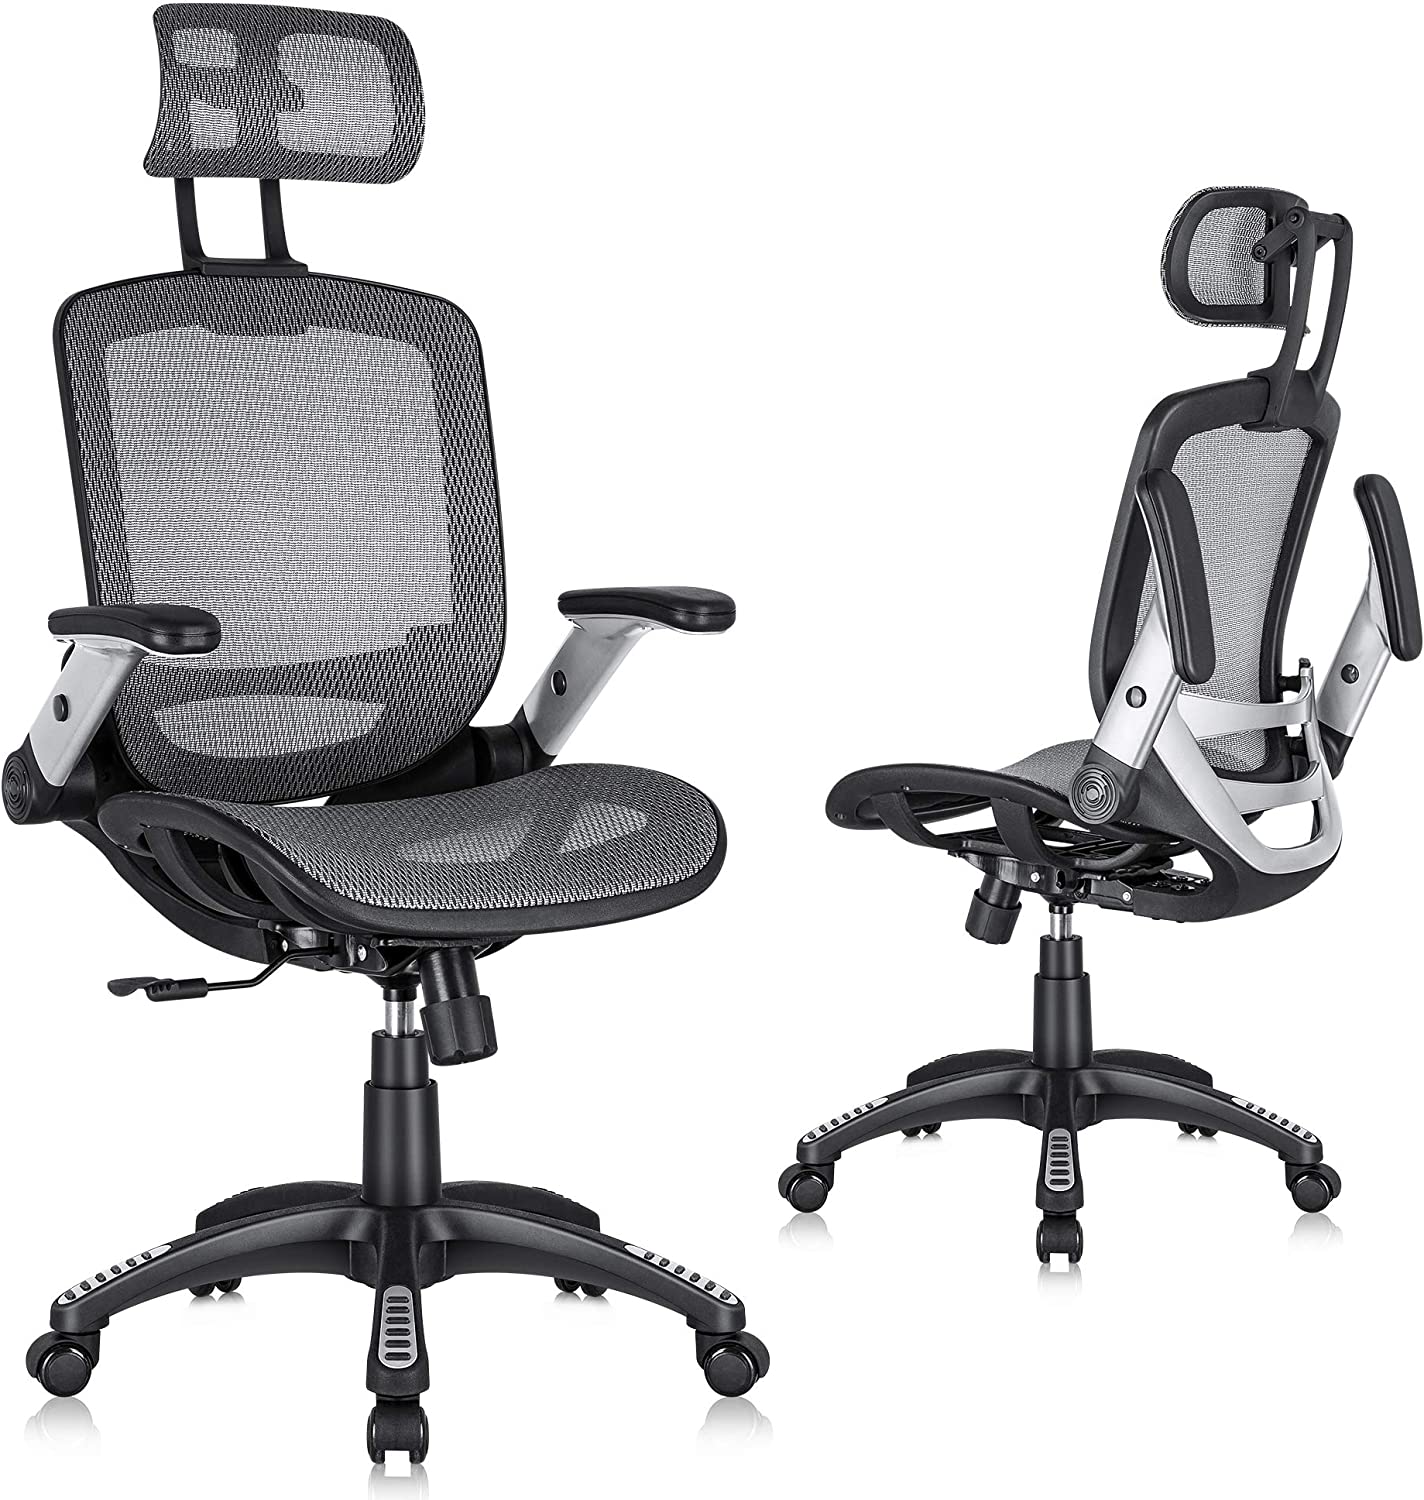 Mesh Office Chair: The Ideal Accessory for Your Office